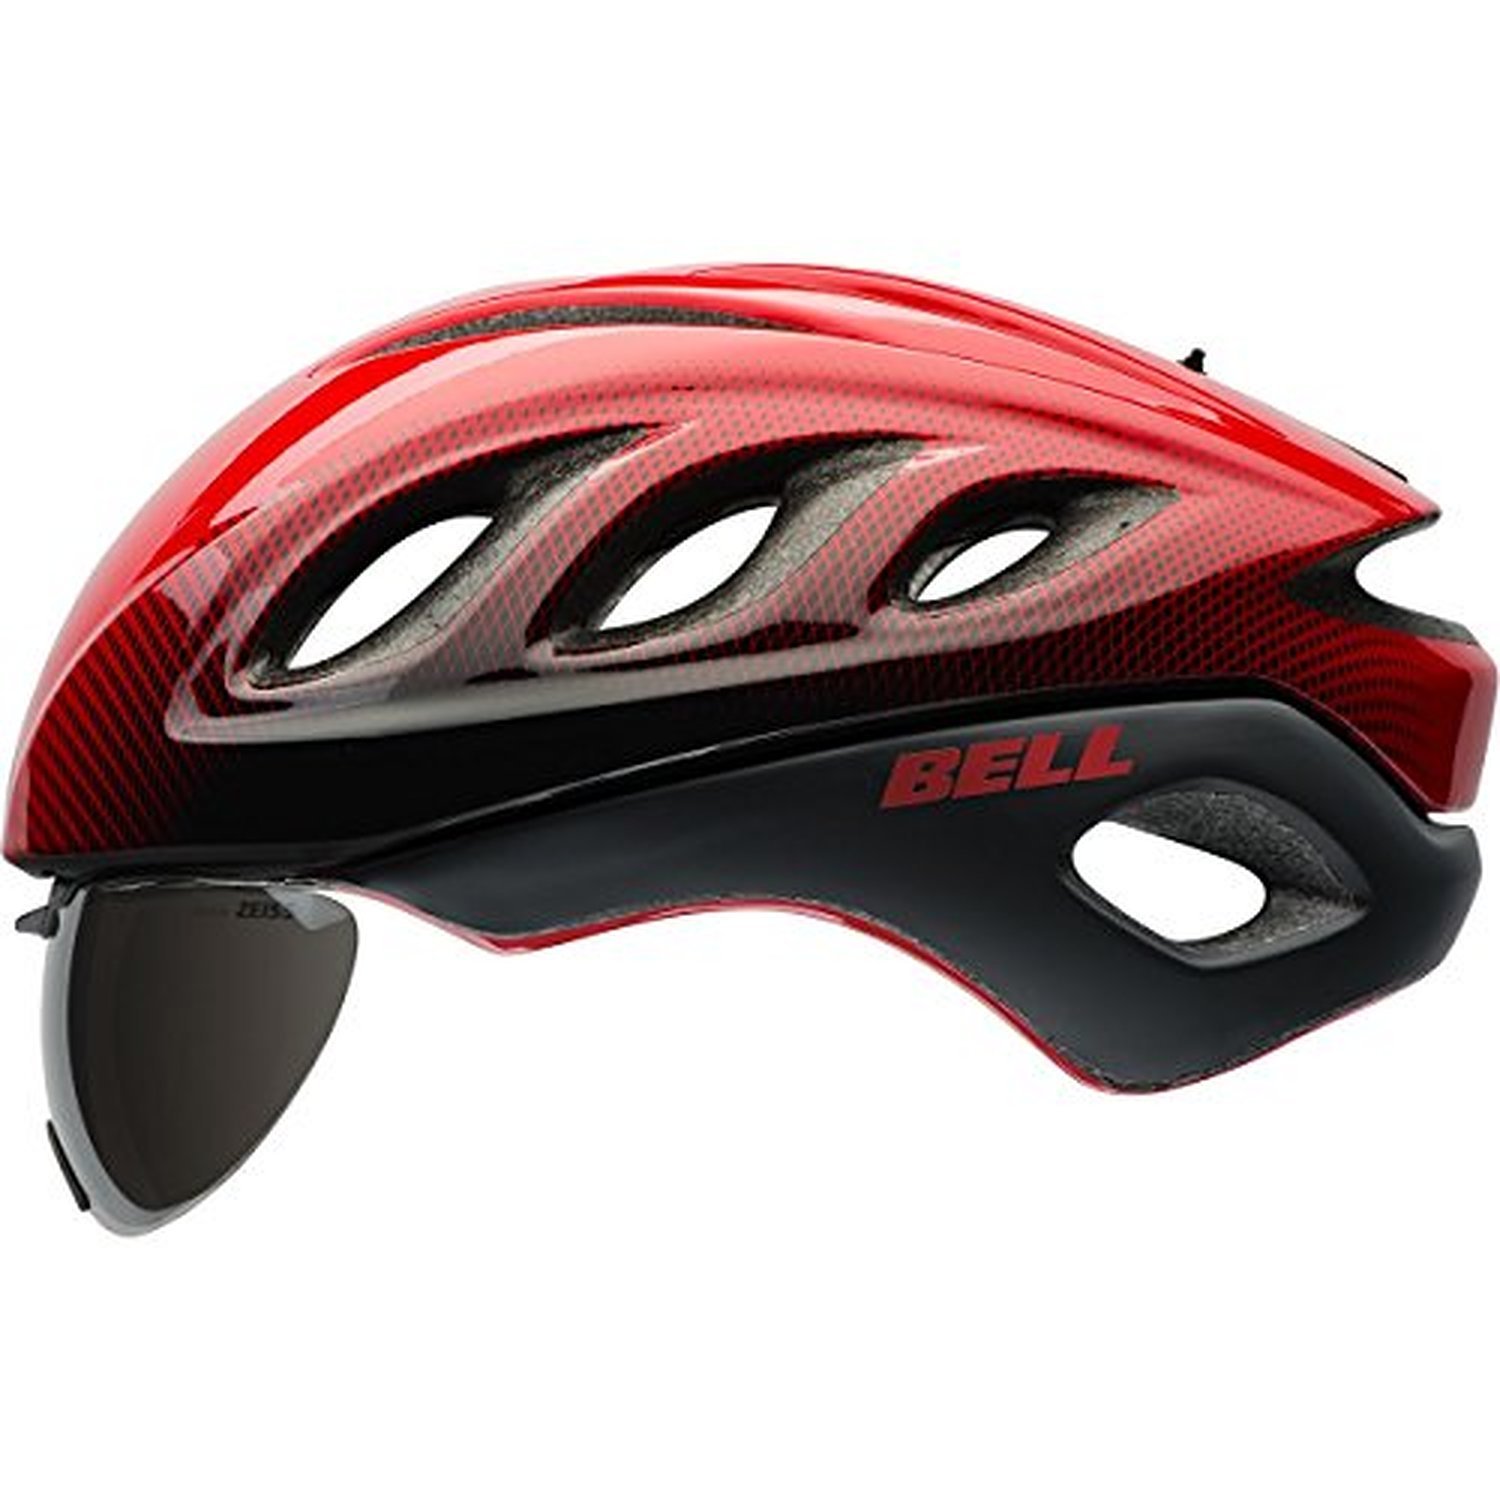 Bell Star Pro Race Helmet with Tinted Eye Shield 2016 Small